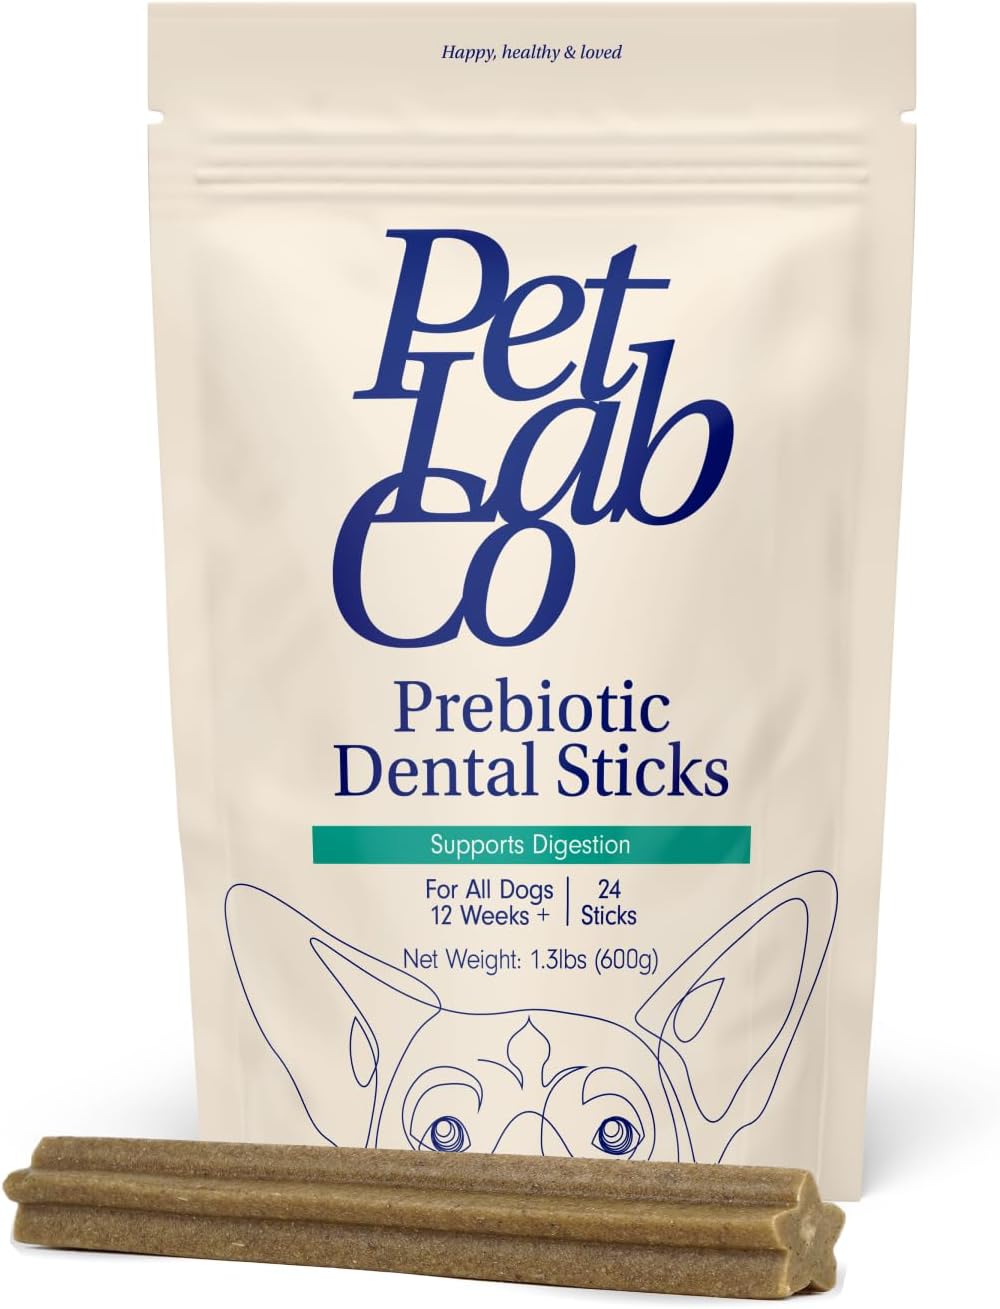 Petlab Co. Dental Sticks – Dog Dental Chews -Target Plaque & Tartar Build-Up at The Source - Designed to Maintain Your Dog’s Oral Health, Keep Breath Fresh and Provide Digestive Help (24 Sticks)